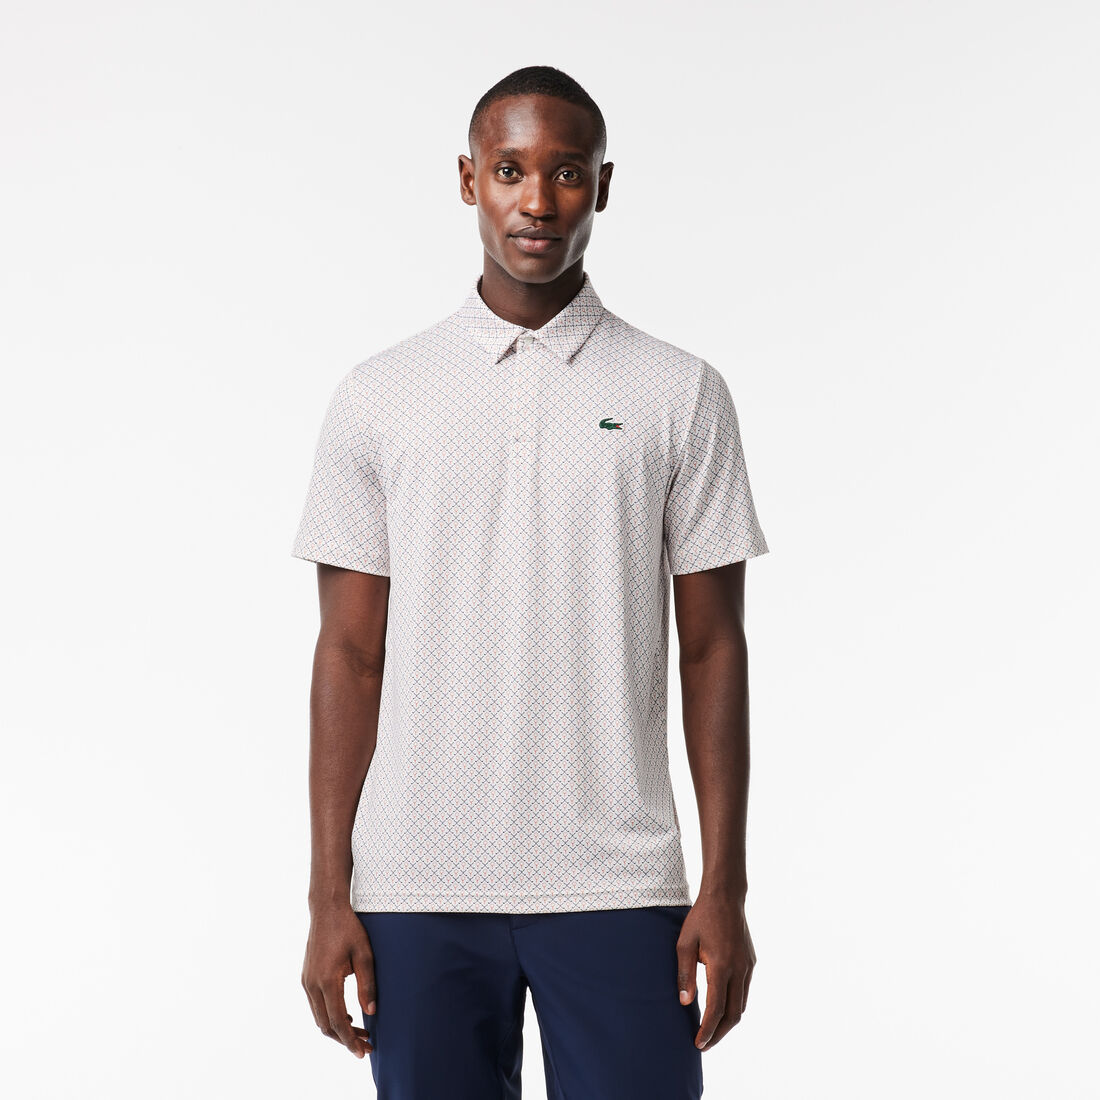 Men's Lacoste Golf Printed Recycled Polyester Polo Shirt - DH5175-00-MBI